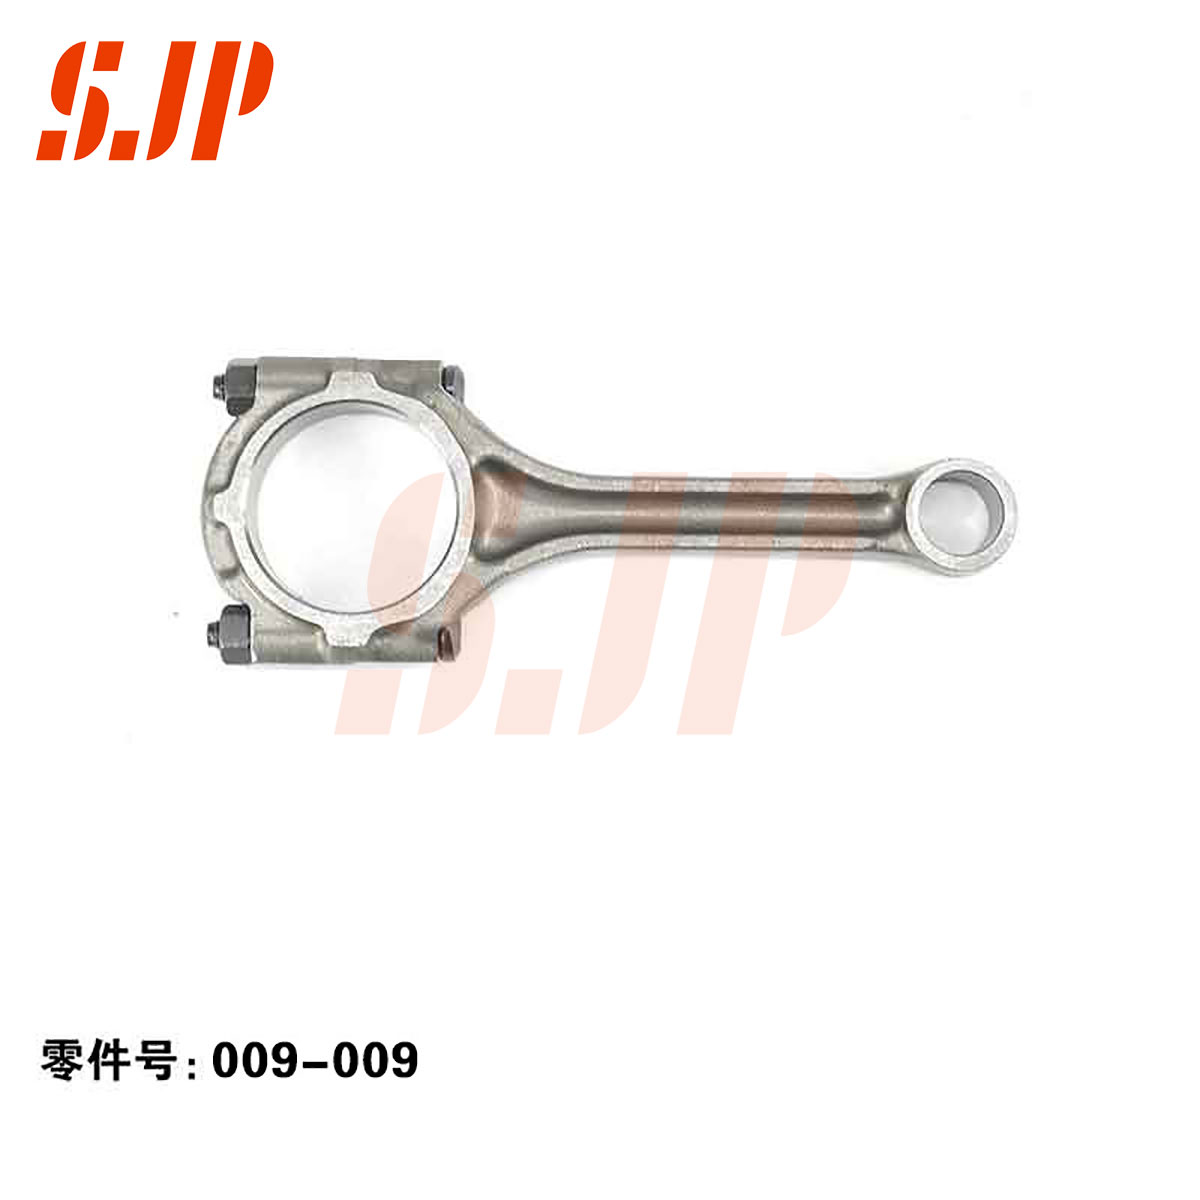 SJ-009-009 Connecting Rod For 4G13/18 Mitsubishi 4G15T